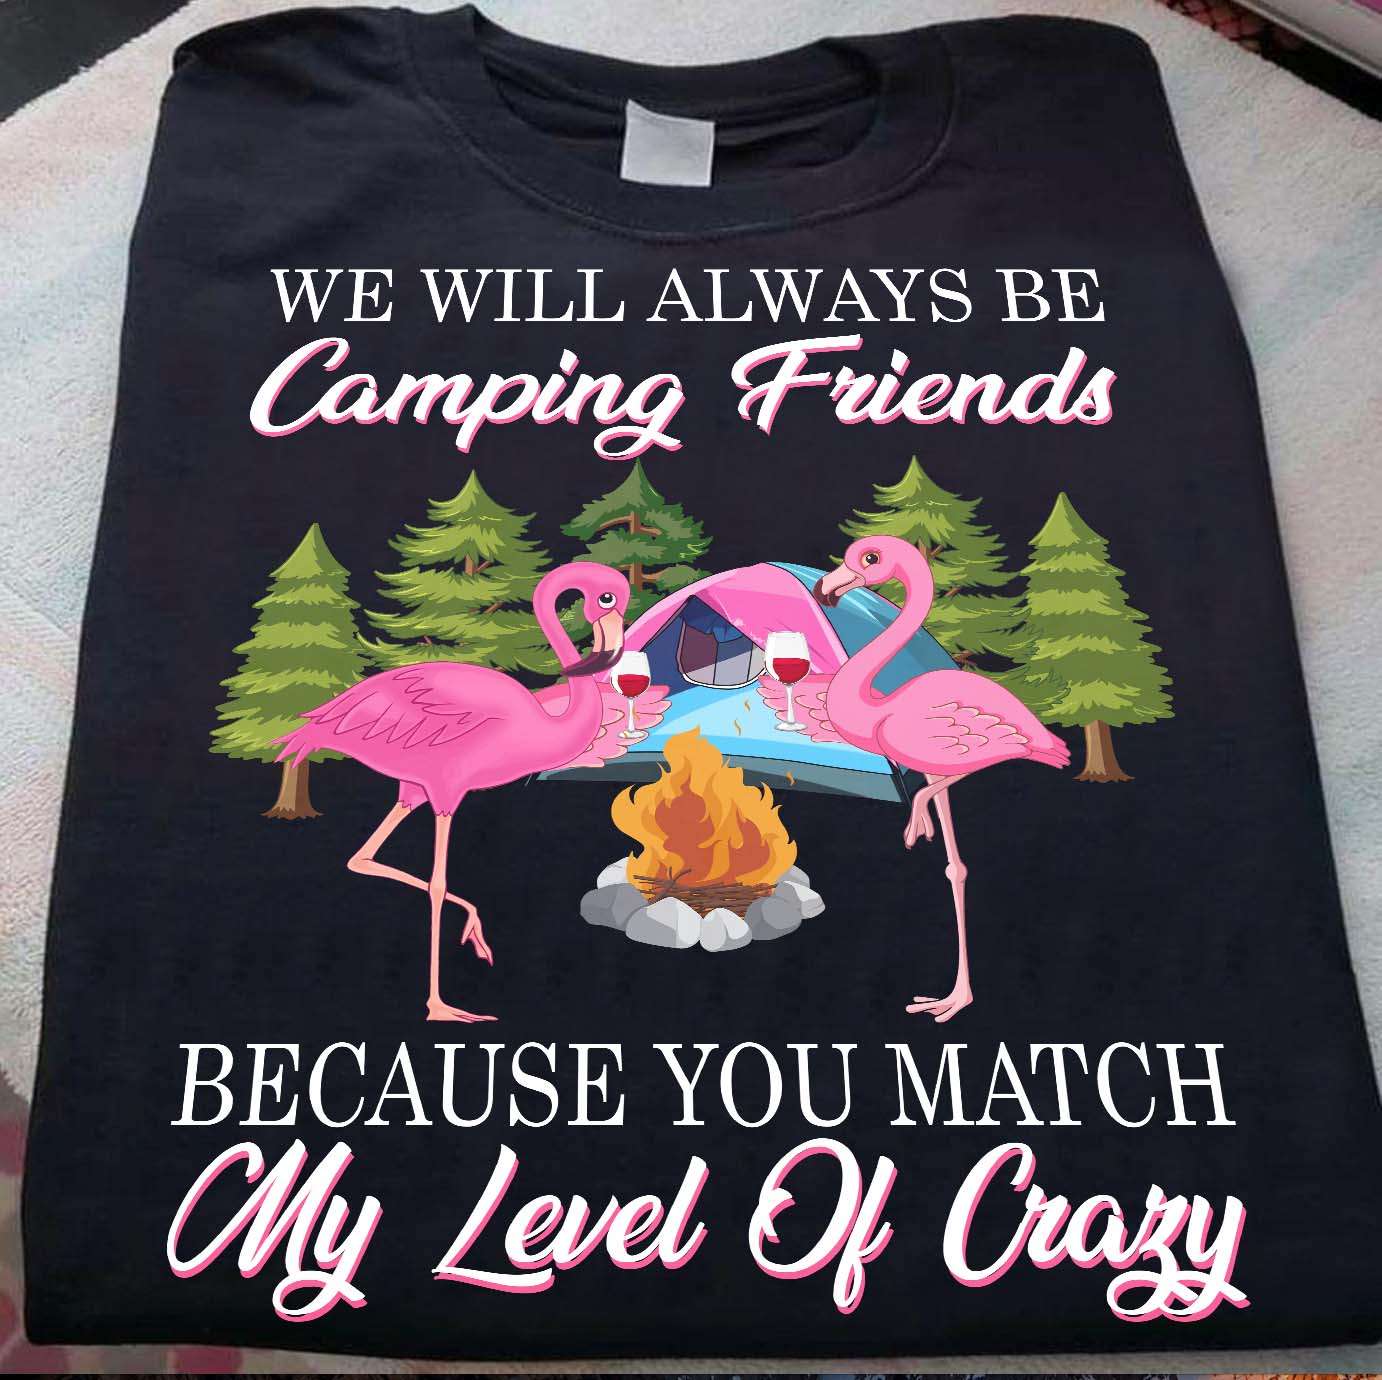 We will always be camping friends because you match my level of crazy - Crazy camping partners